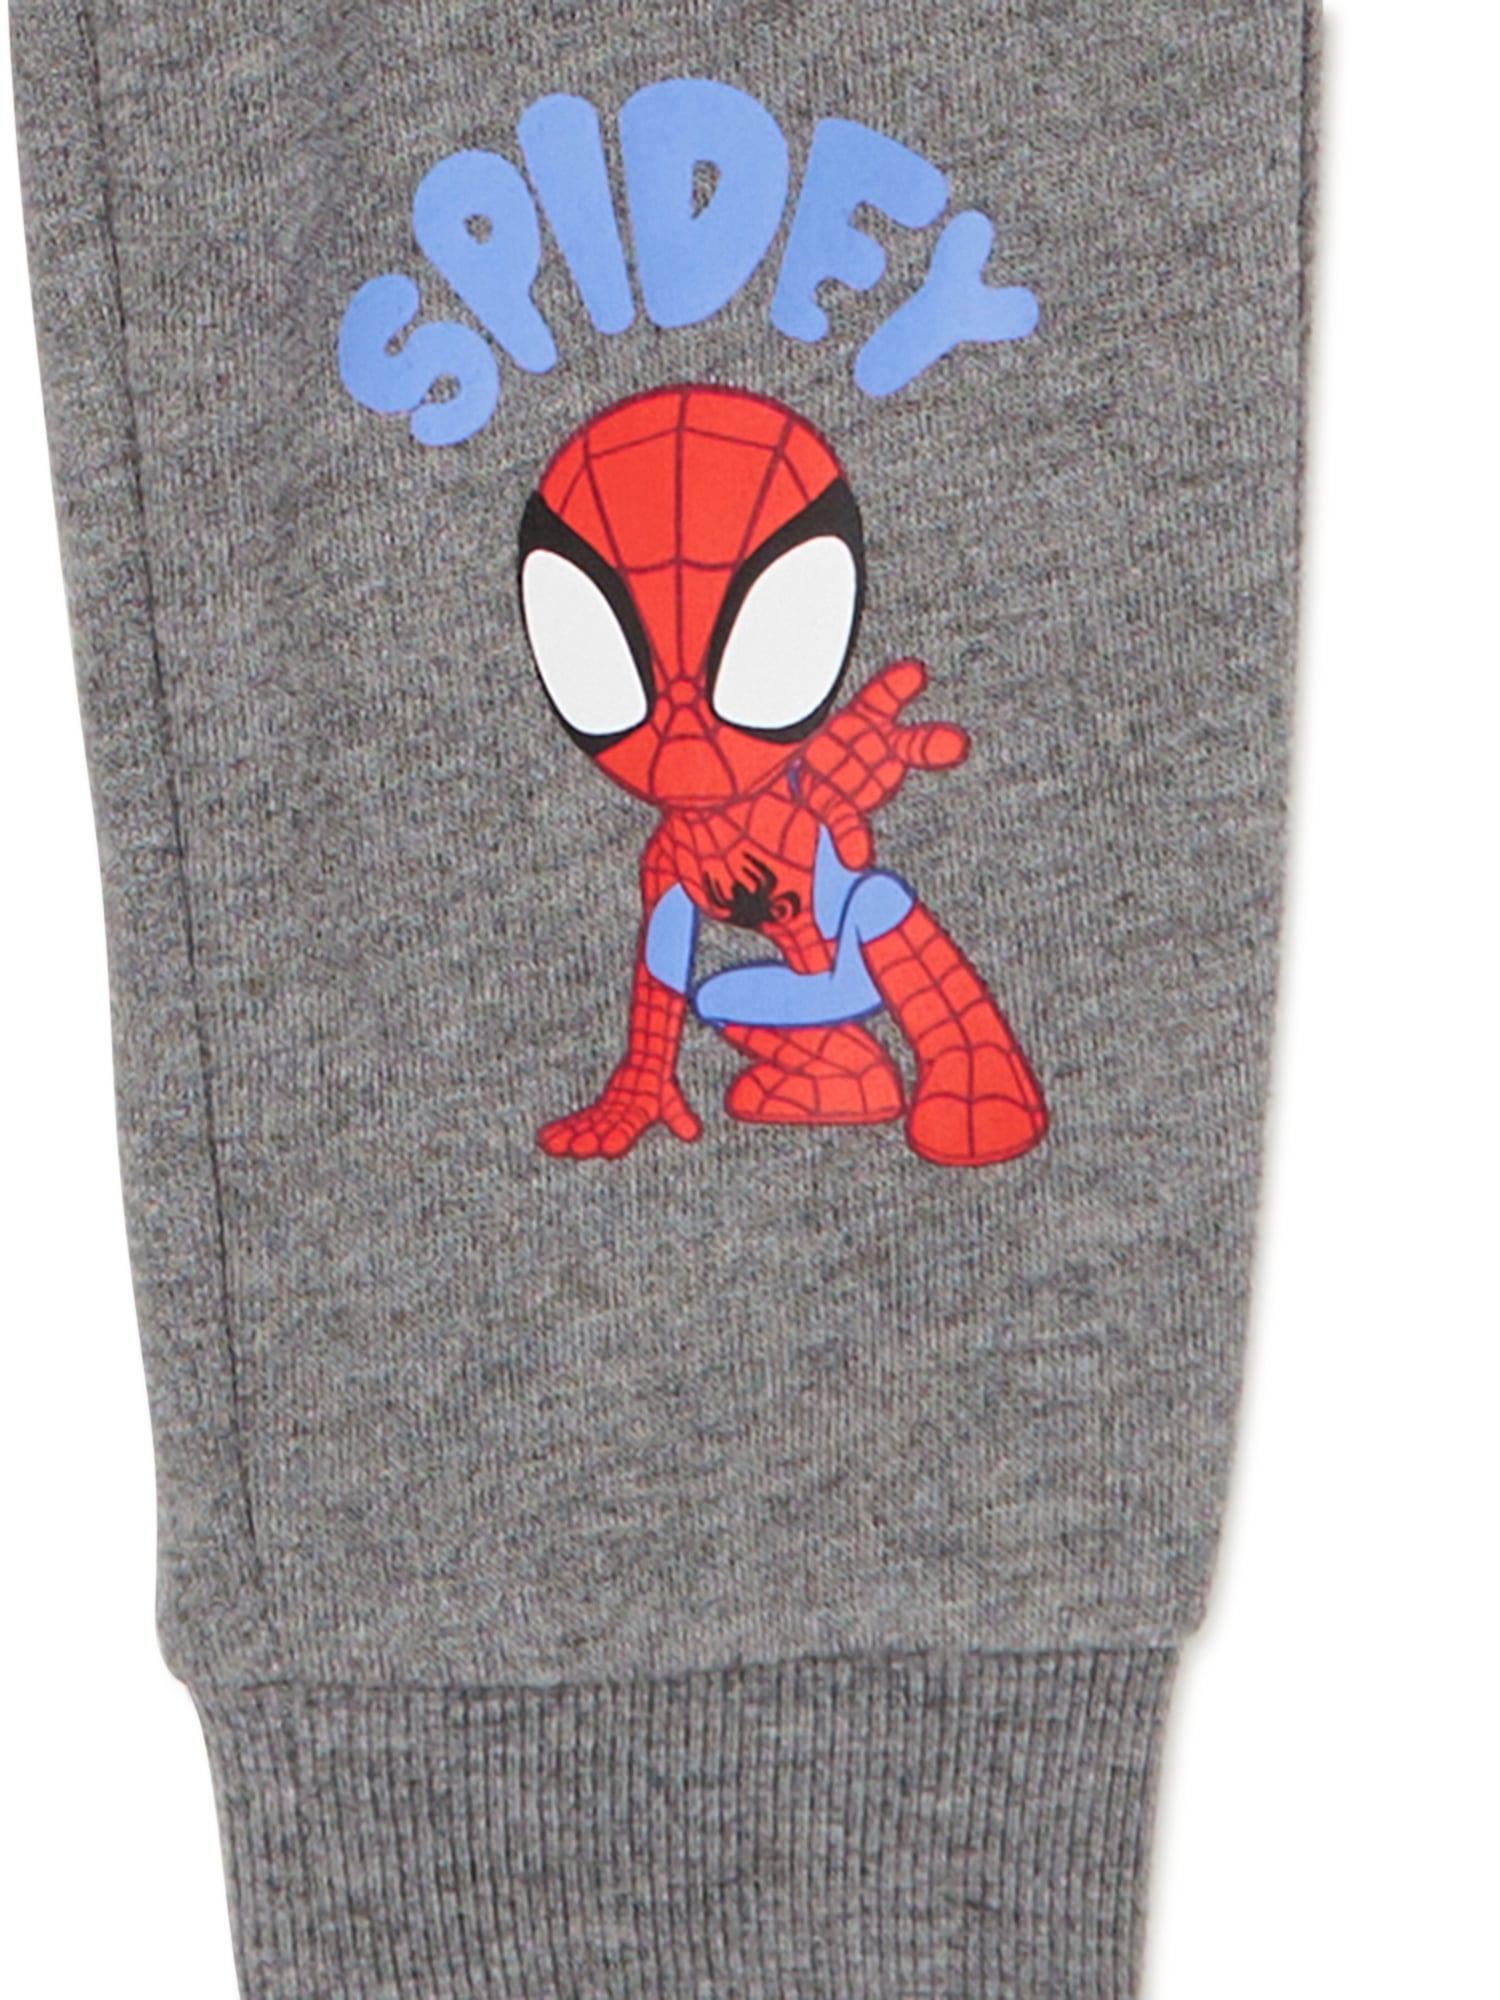 Spider-Man Toddler Boy Fleece Hoodie Outfit Set, Sizes 12M-5T 